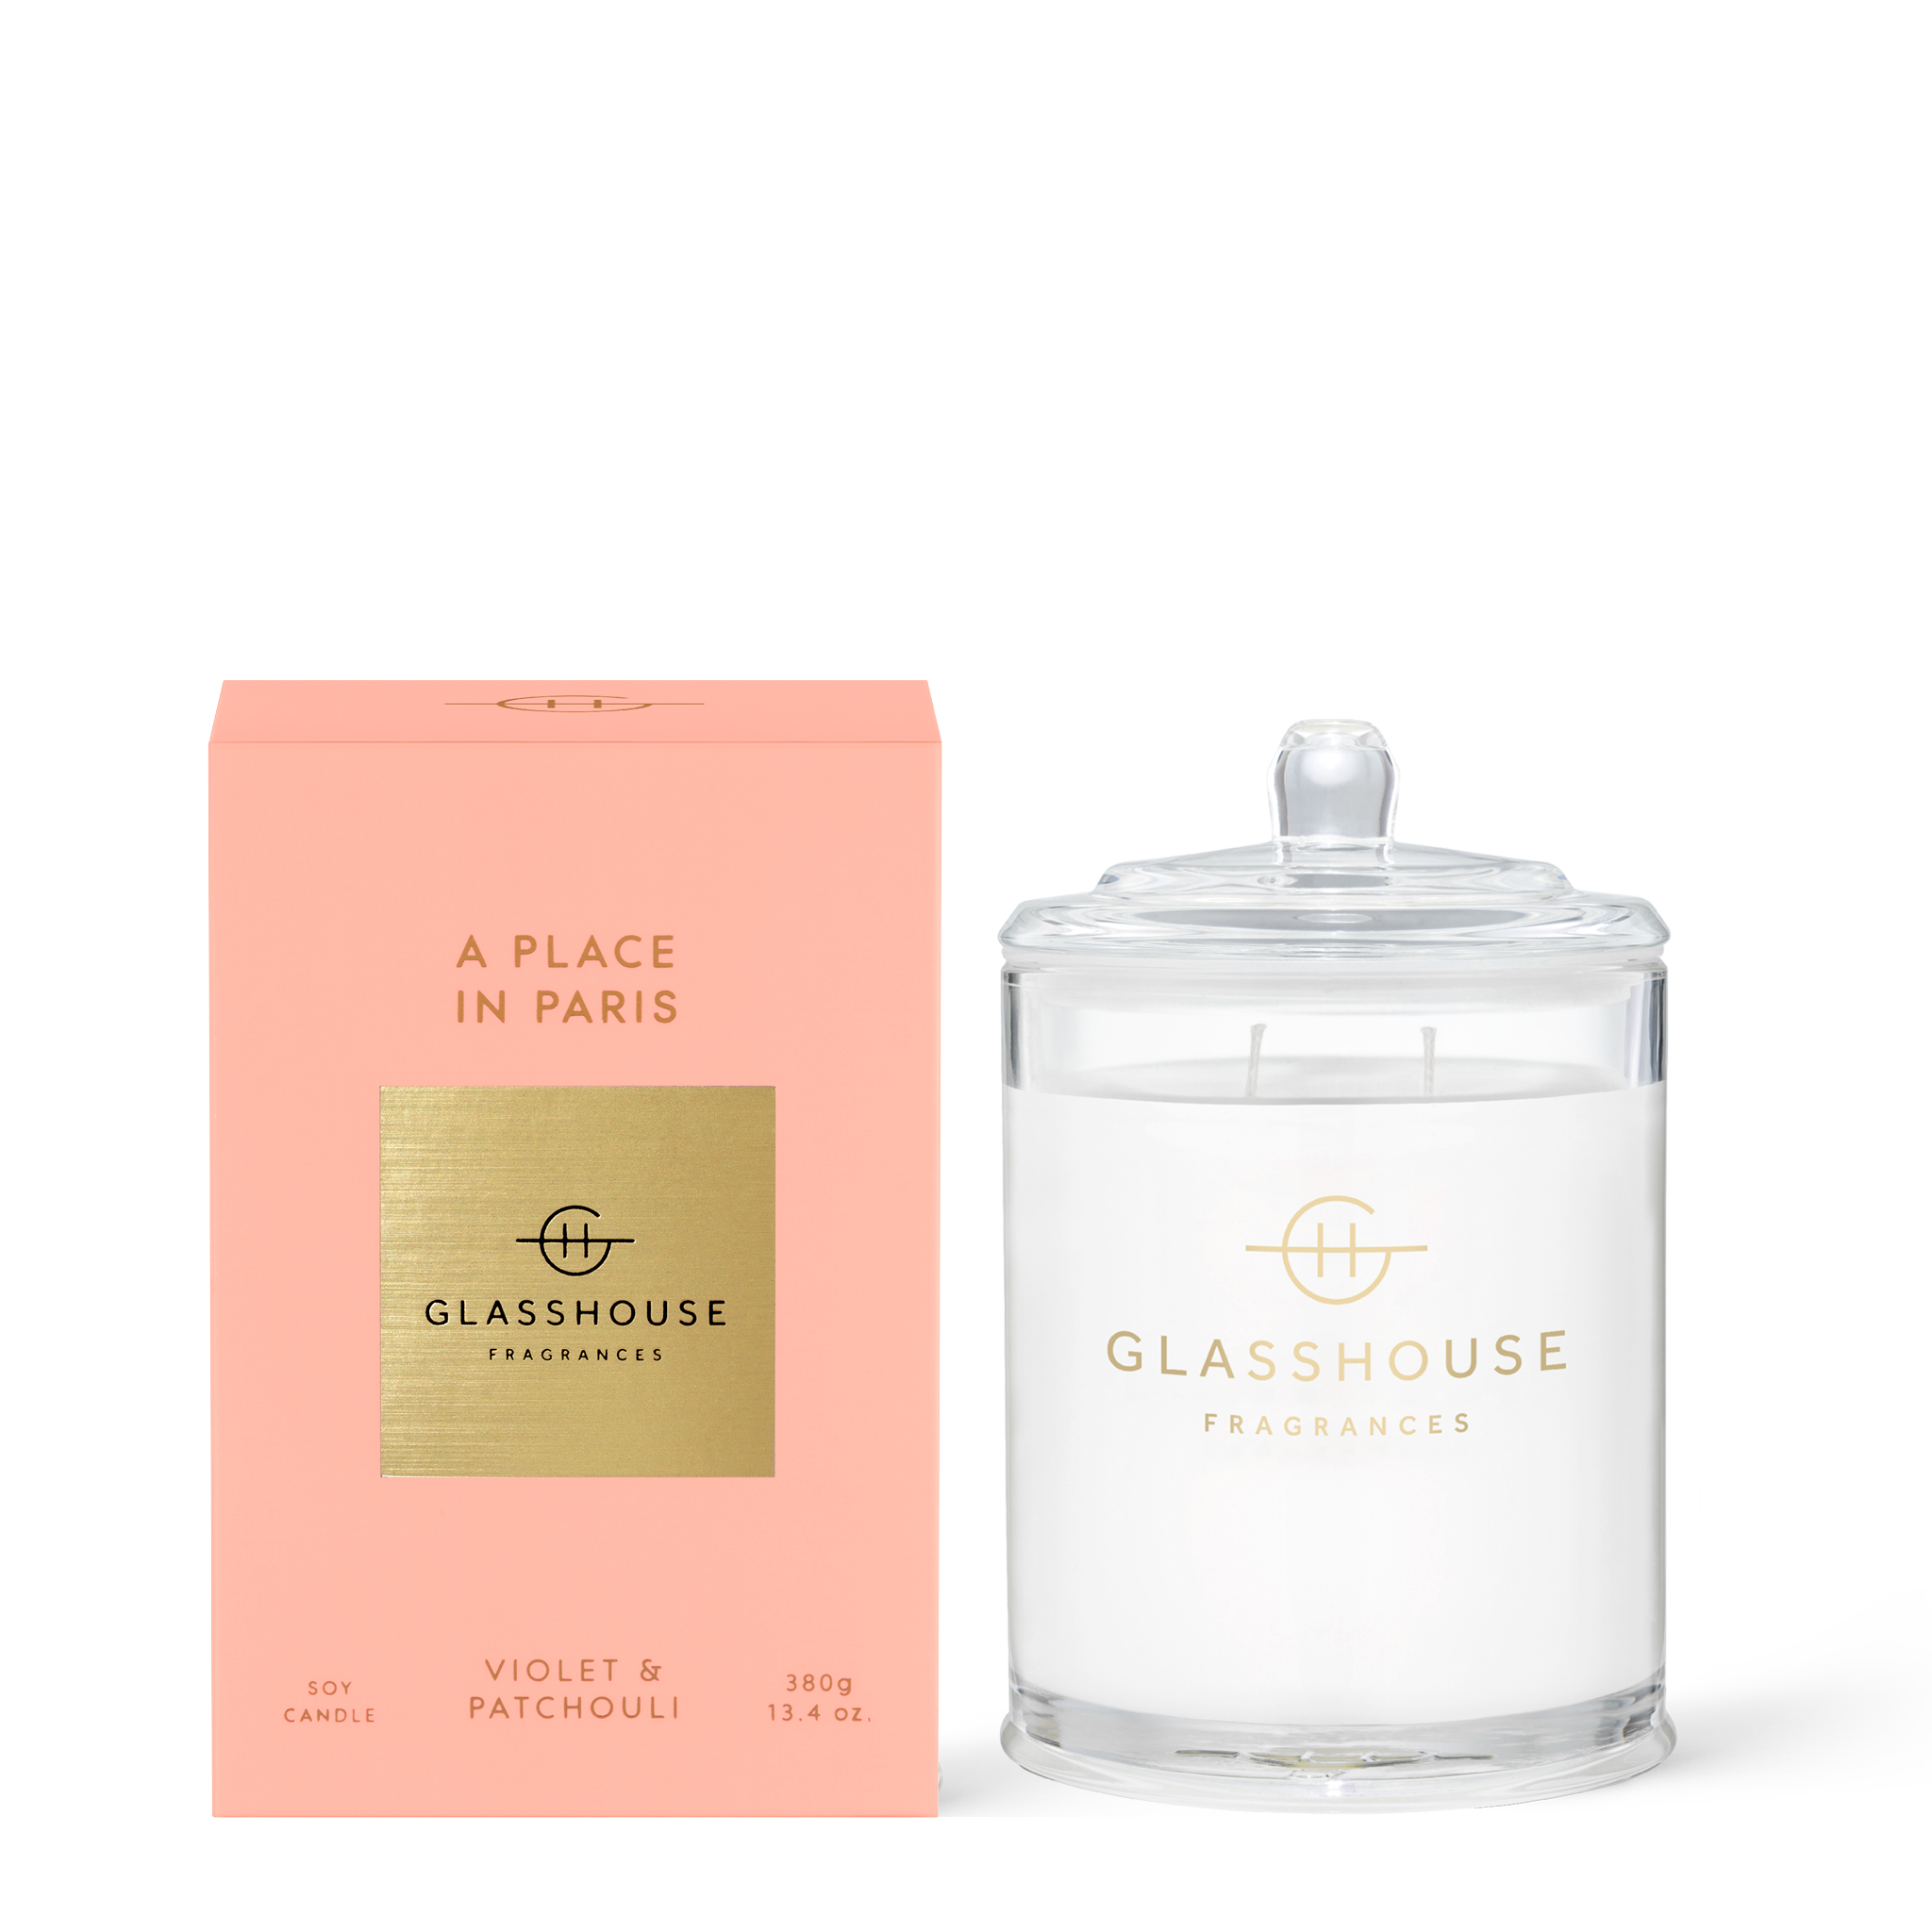 Glasshouse Fragrances A Place in Paris Cedarwood Bergamot  380g Soy Candle with box